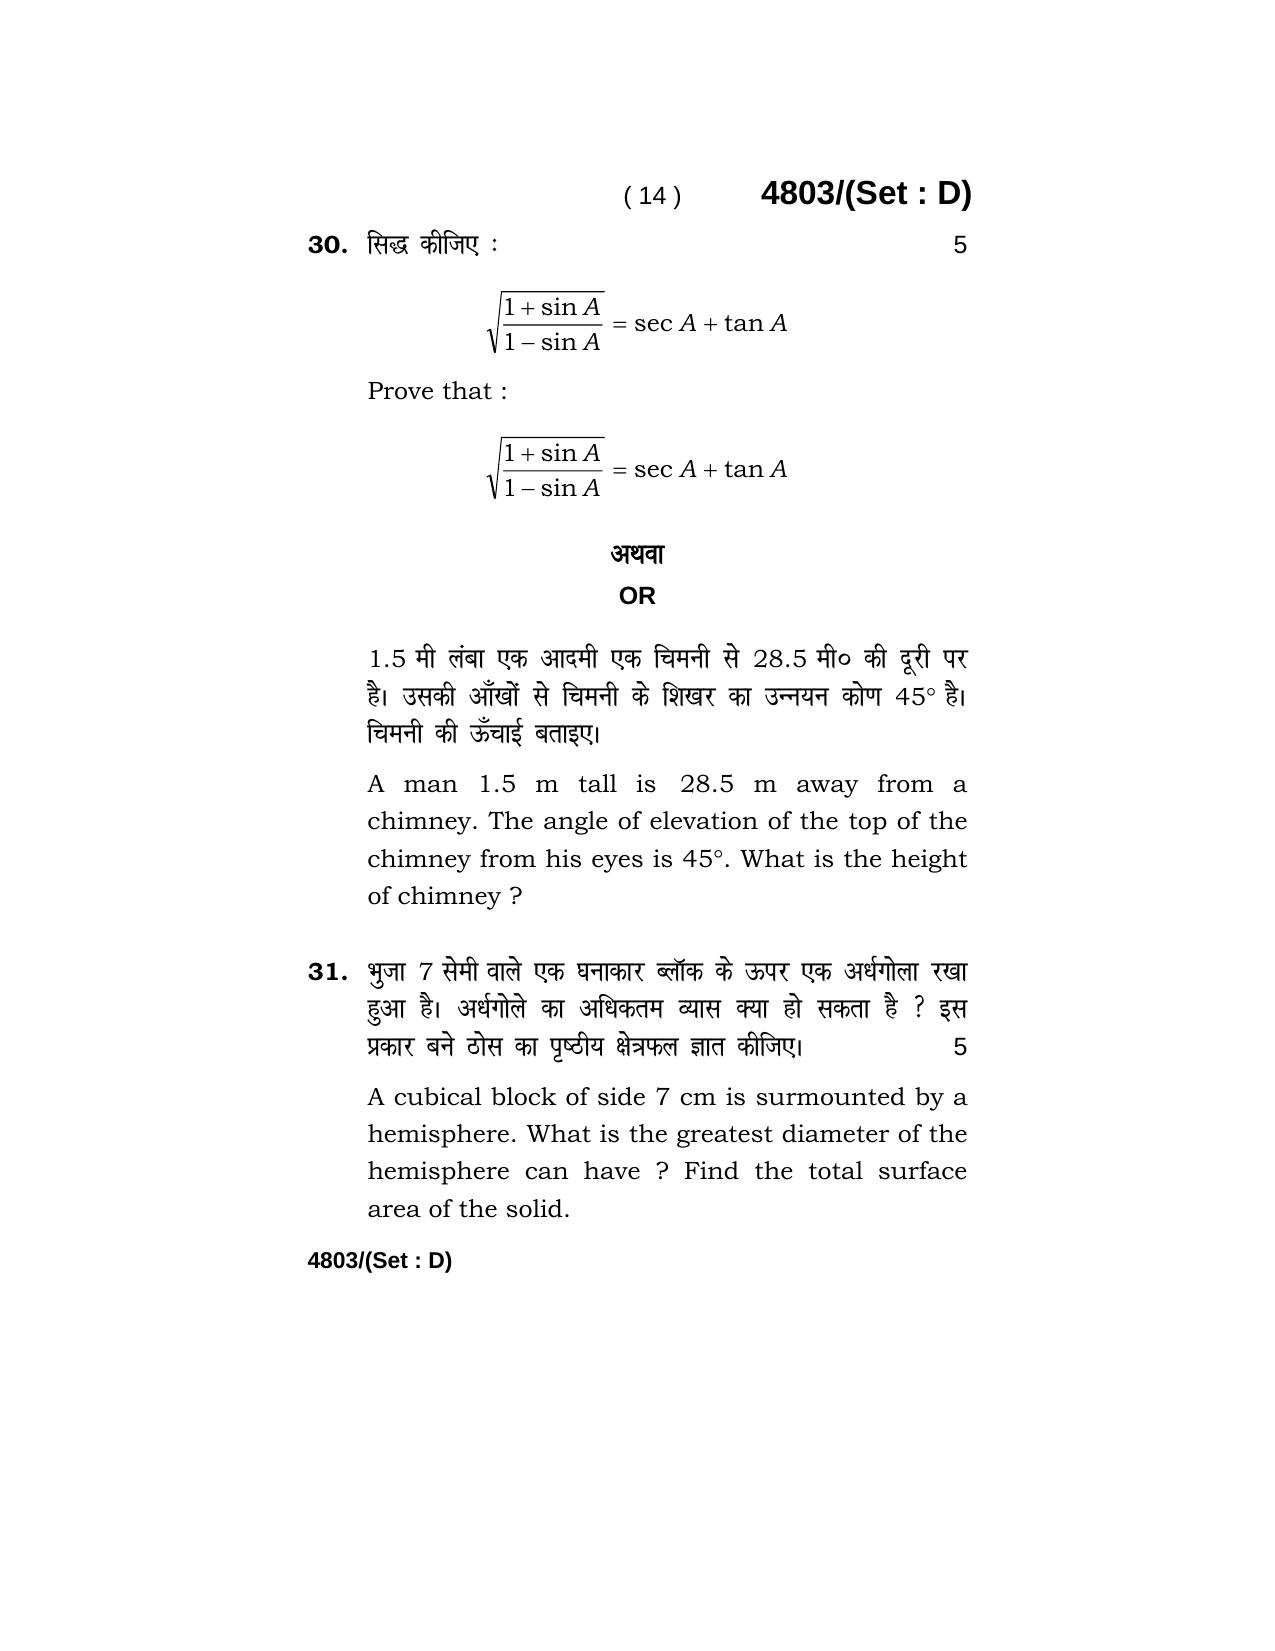 Haryana Board HBSE Class 10 Mathematics 2020 Question Paper - Page 62